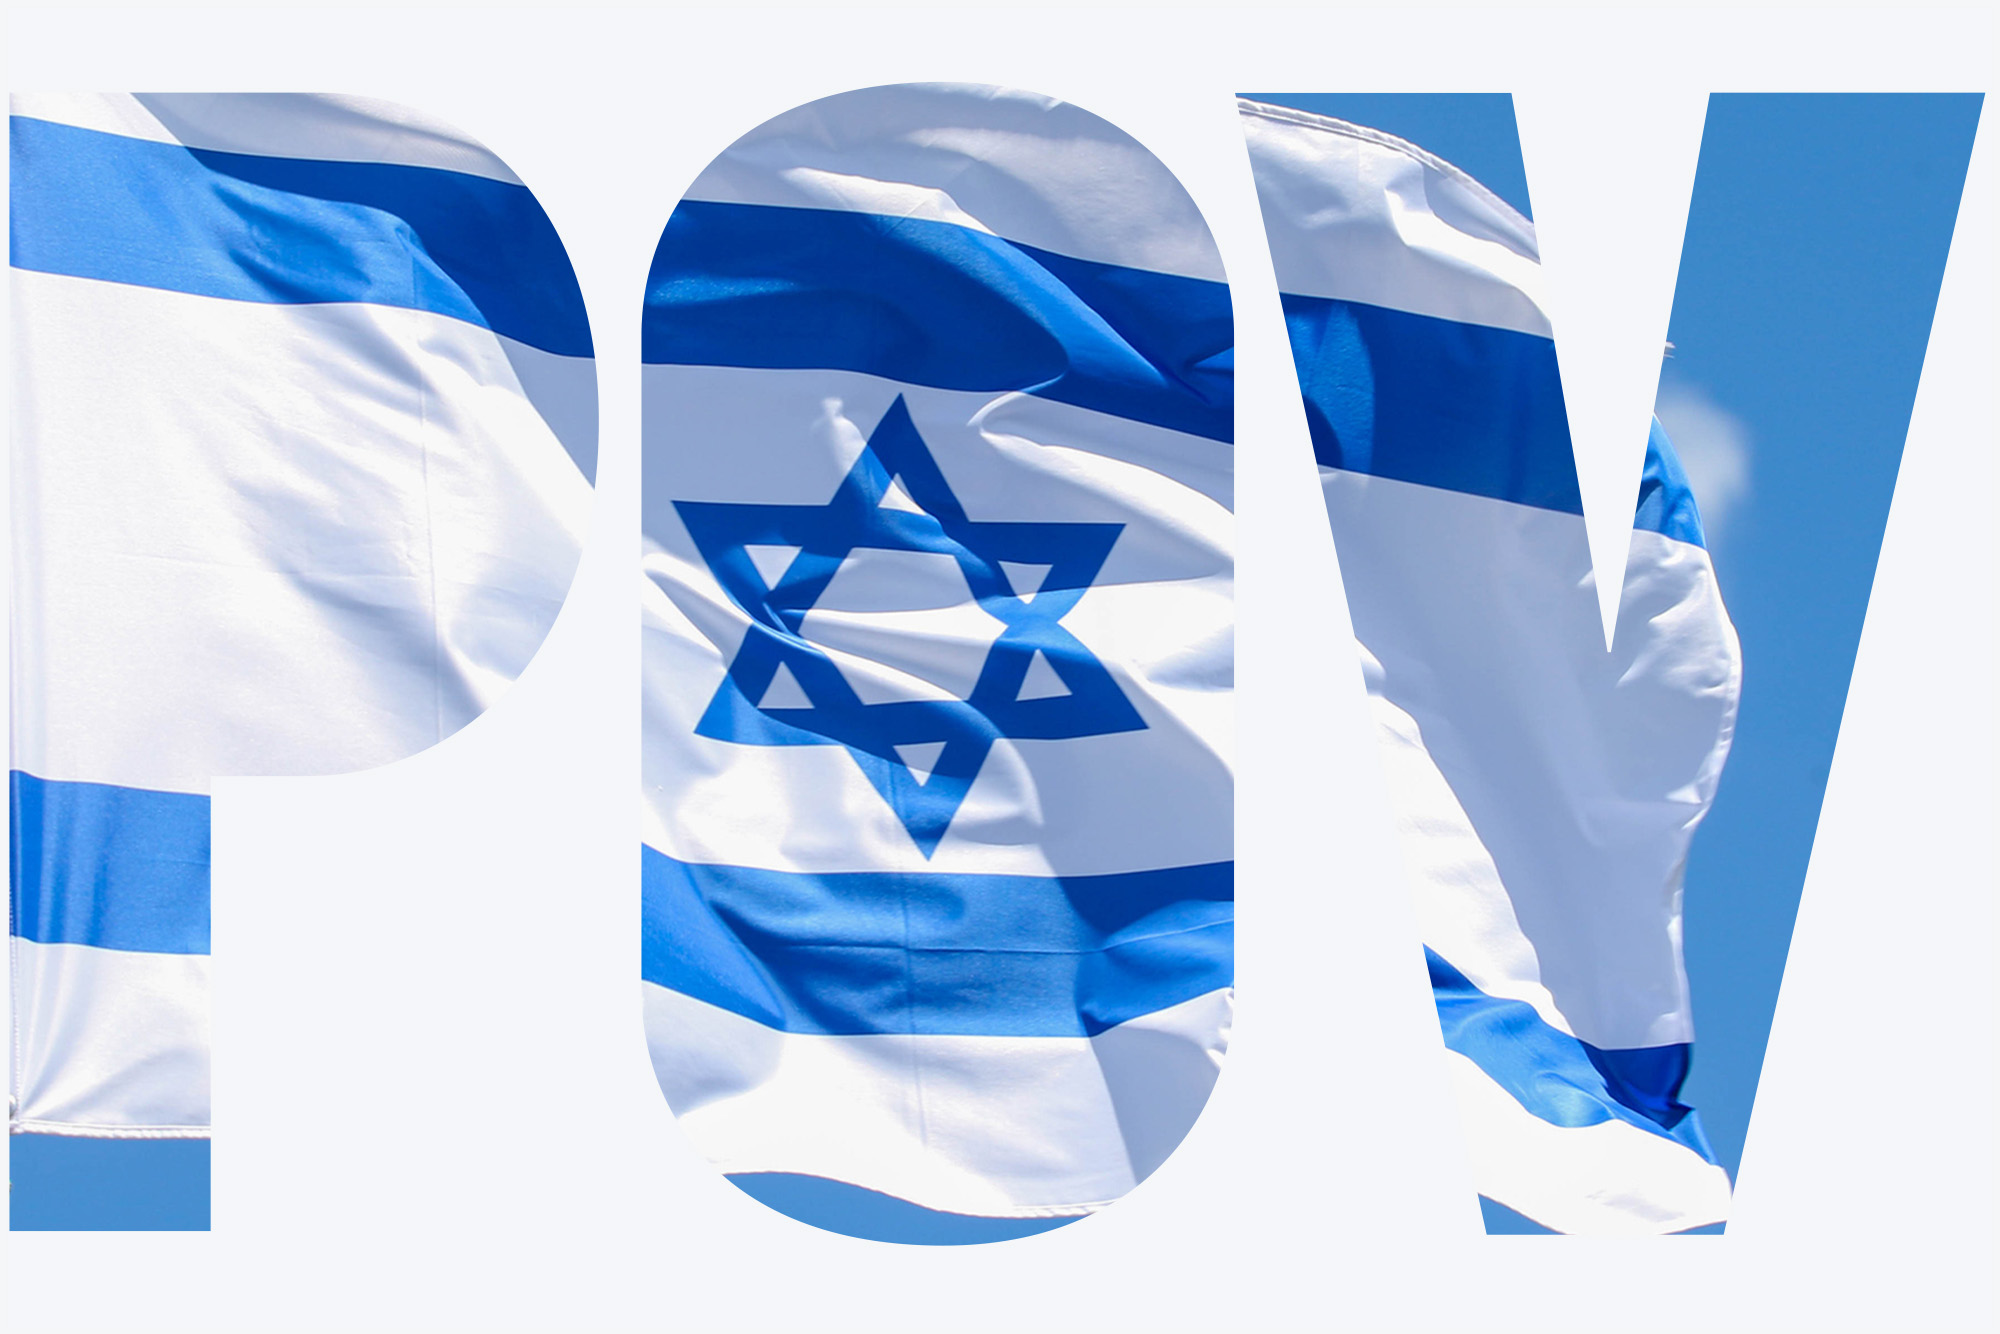 Photo: An Israeli flag, blue and white with a star of David centered. Text overlay reads "POV"